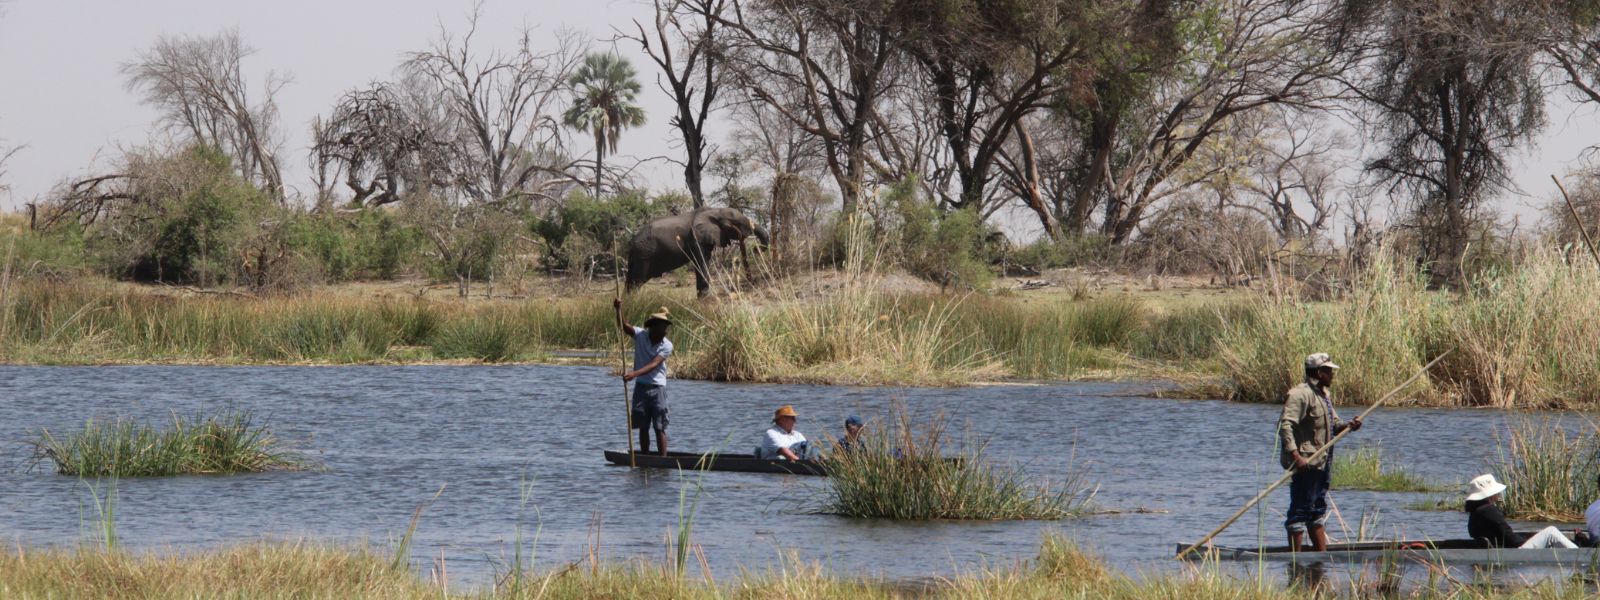 Guests enjoying a mokoro ride in the Okavango Delta with elephants in the background